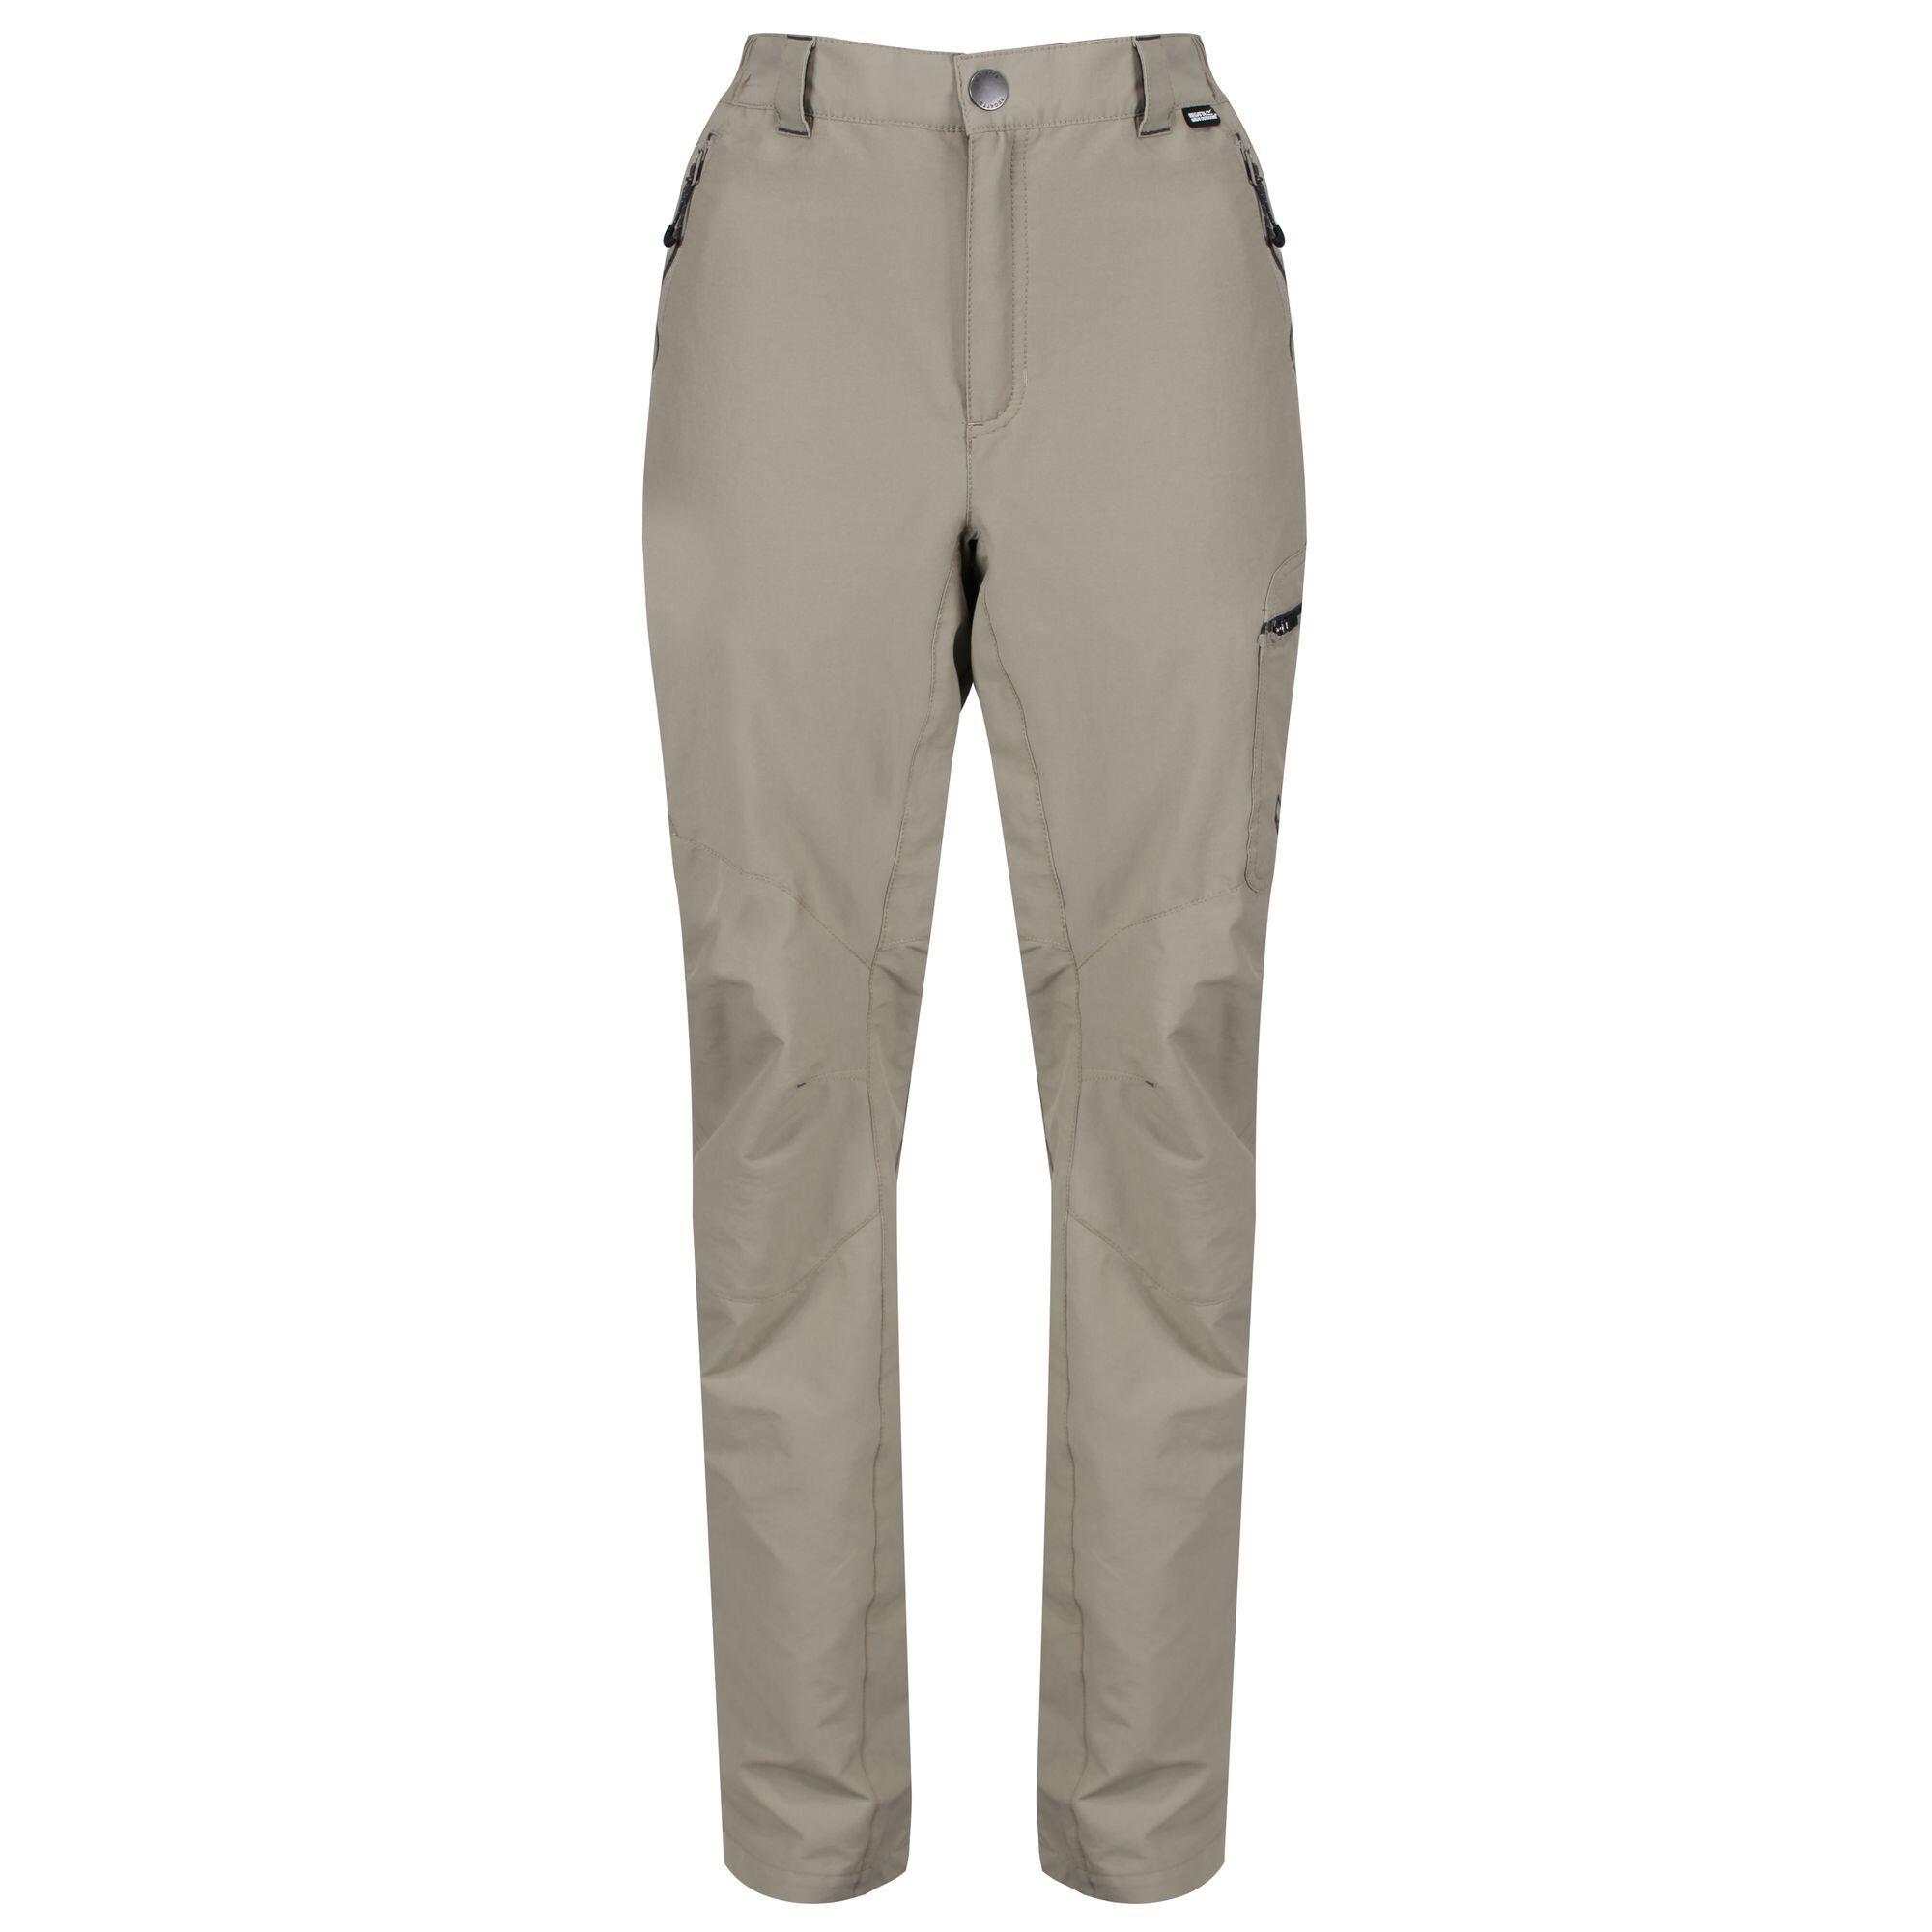 Mens Highton Zip Off Walking Trousers (Parchment White) 1/5